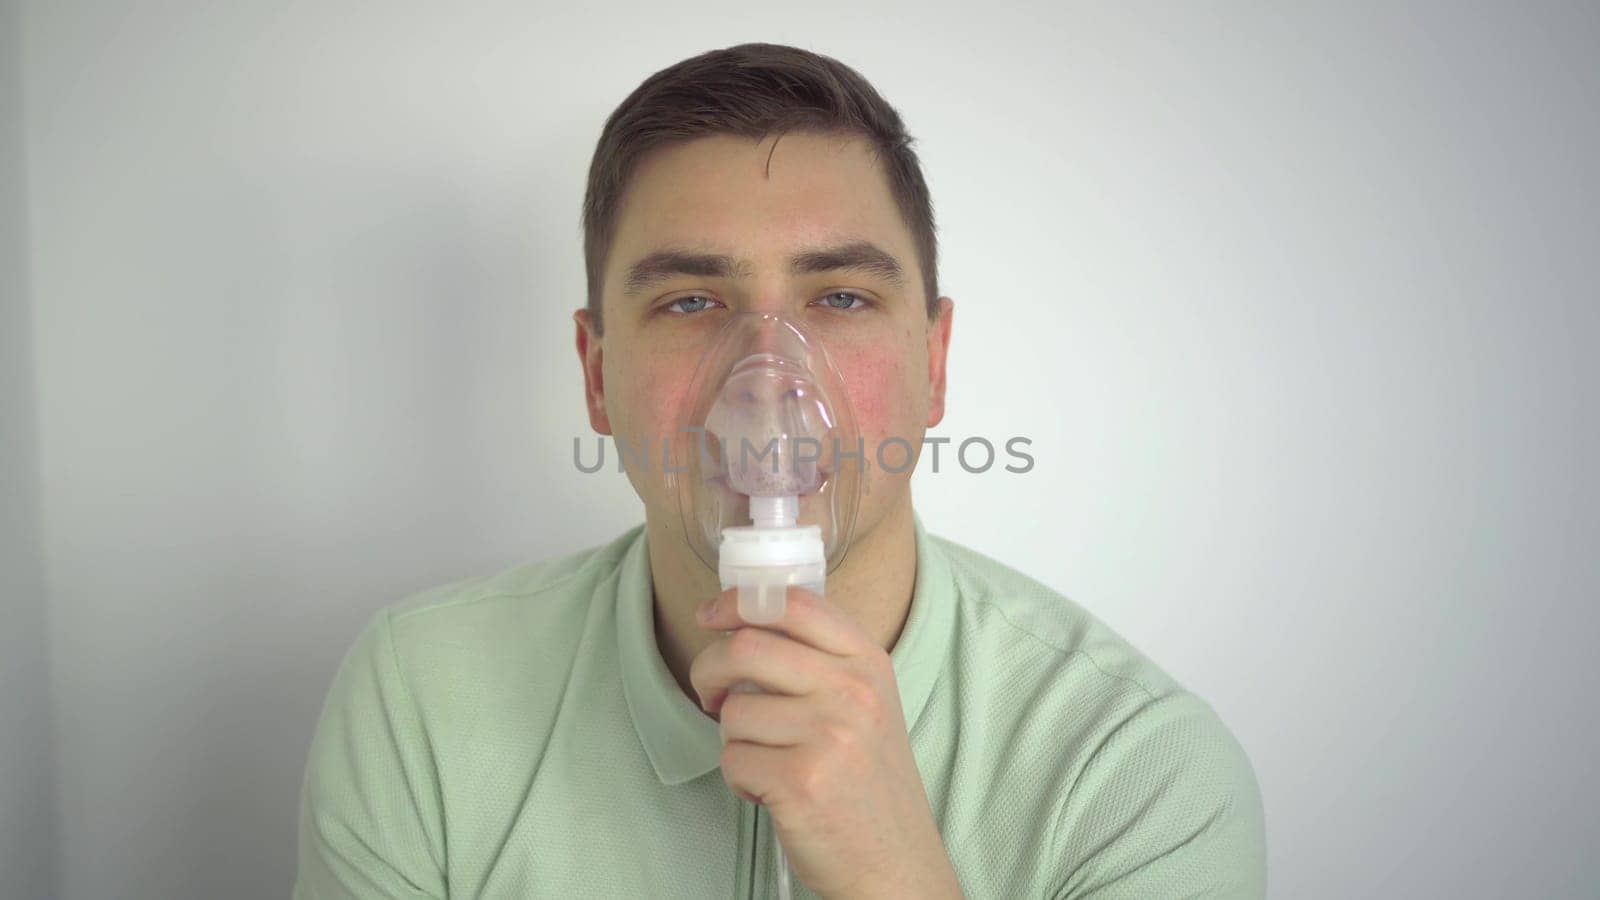 A young man breathes through an inhaler closeup. A man with an oxygen mask is being treated for a respiratory infection. by Puzankov